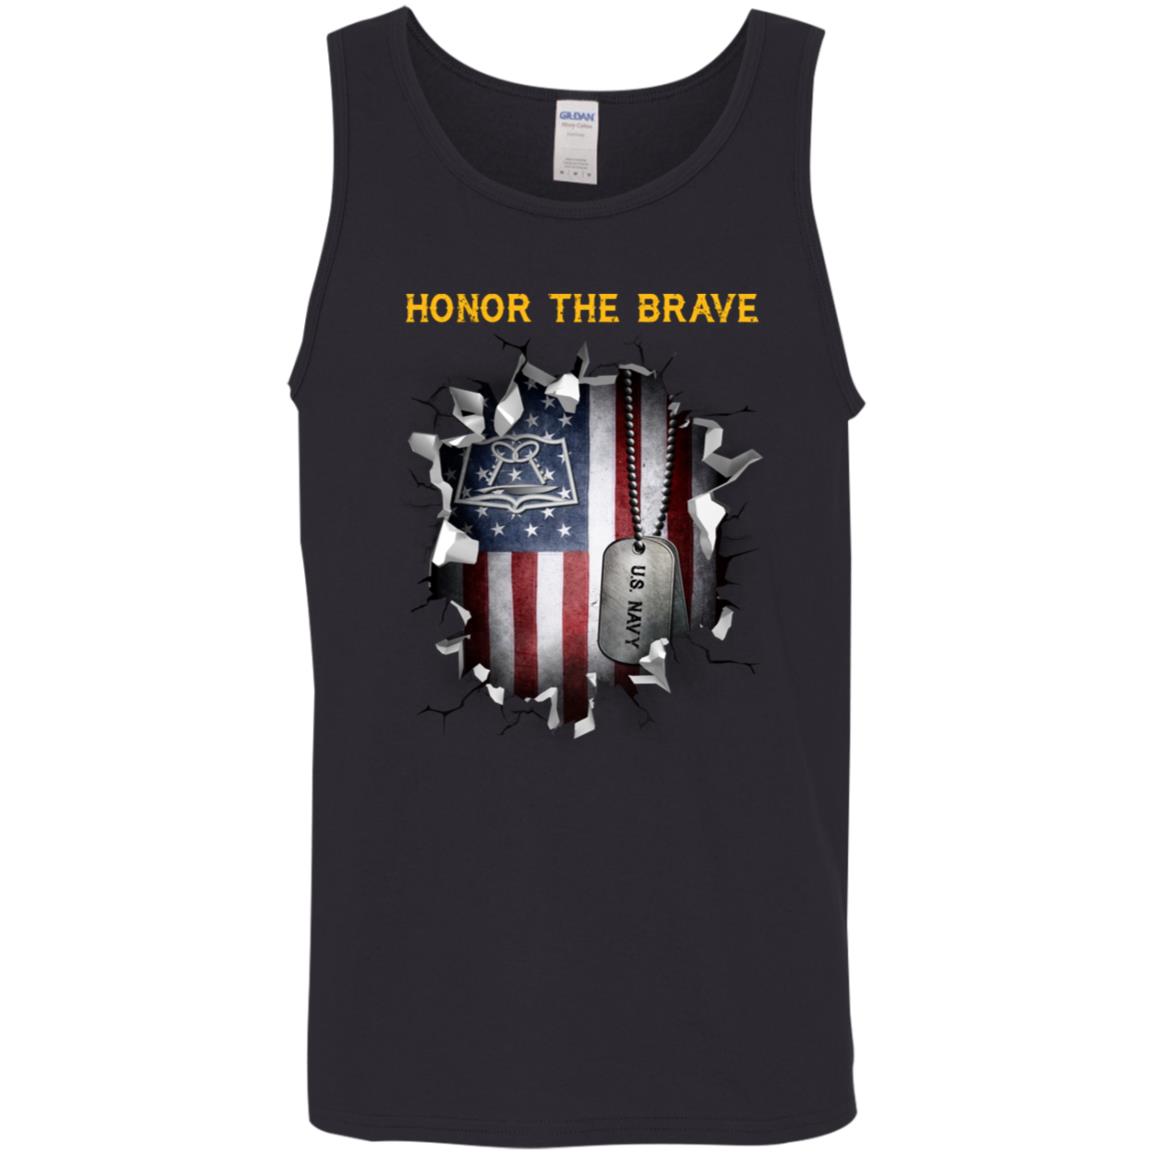 Navy Mess Management Specialist Navy MS - Honor The Brave Front Shirt